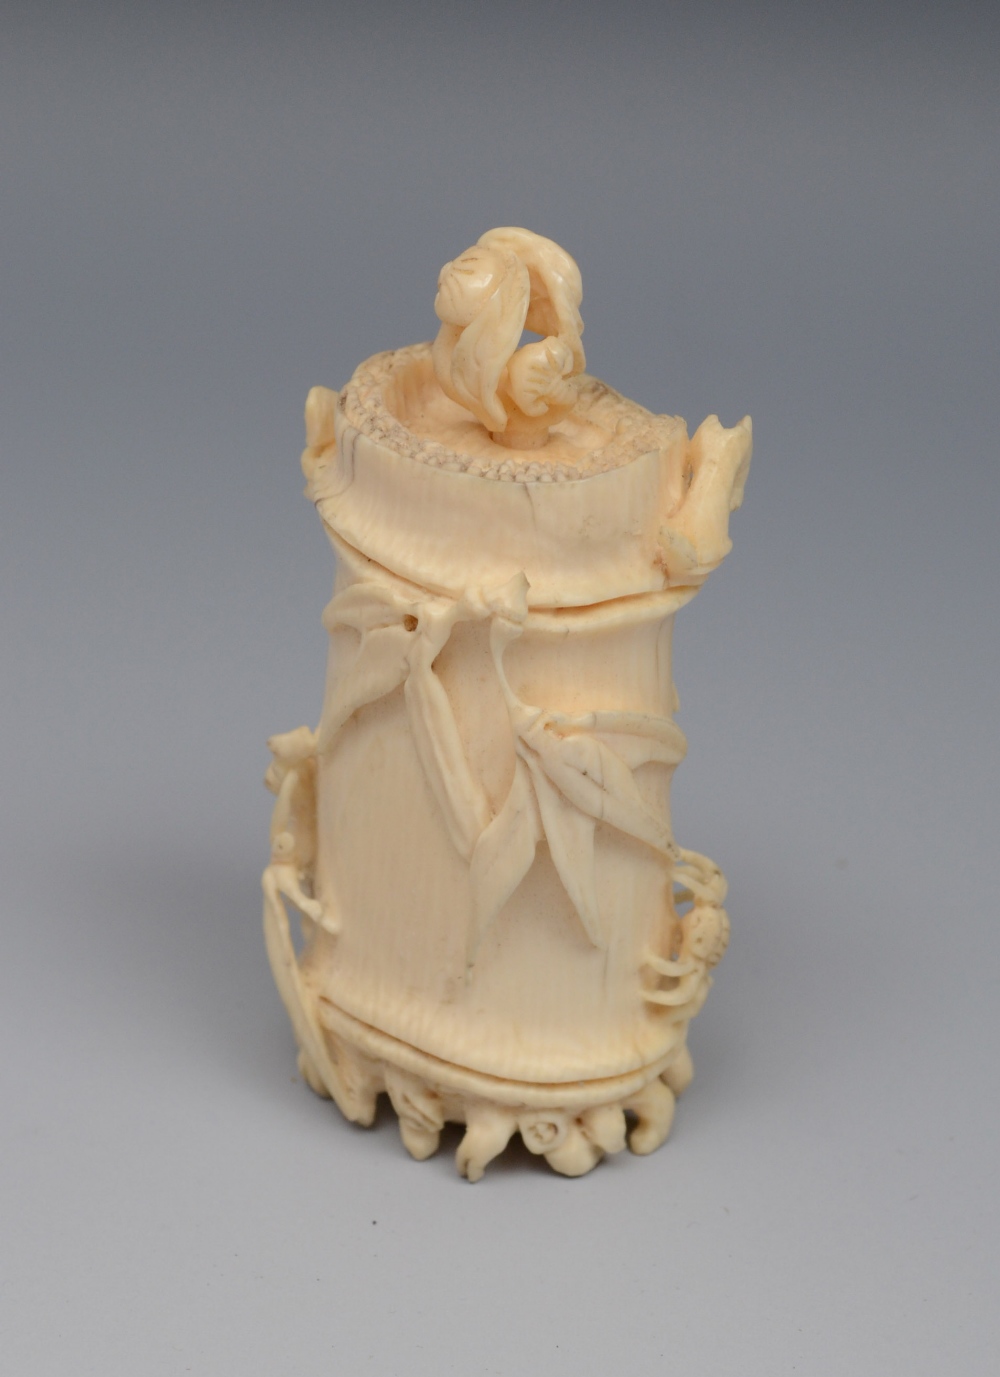 A Chinese ivory scent bottle, carved in relief as leafy bamboo, 5.5cm long, early 20th century